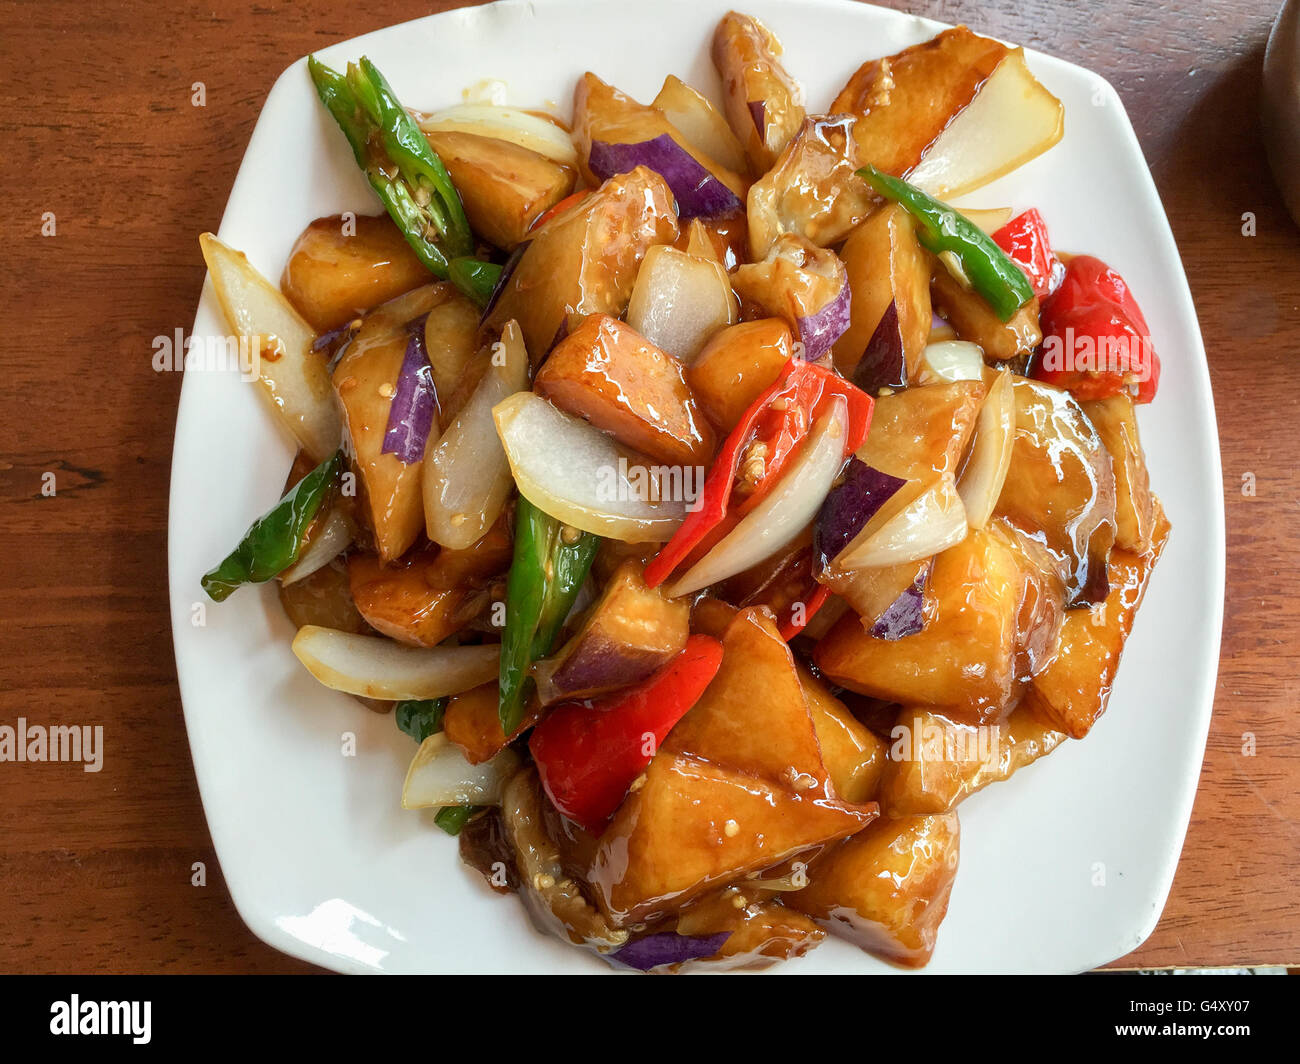 Singapore, vegetables in sweet and sour sauce Stock Photo